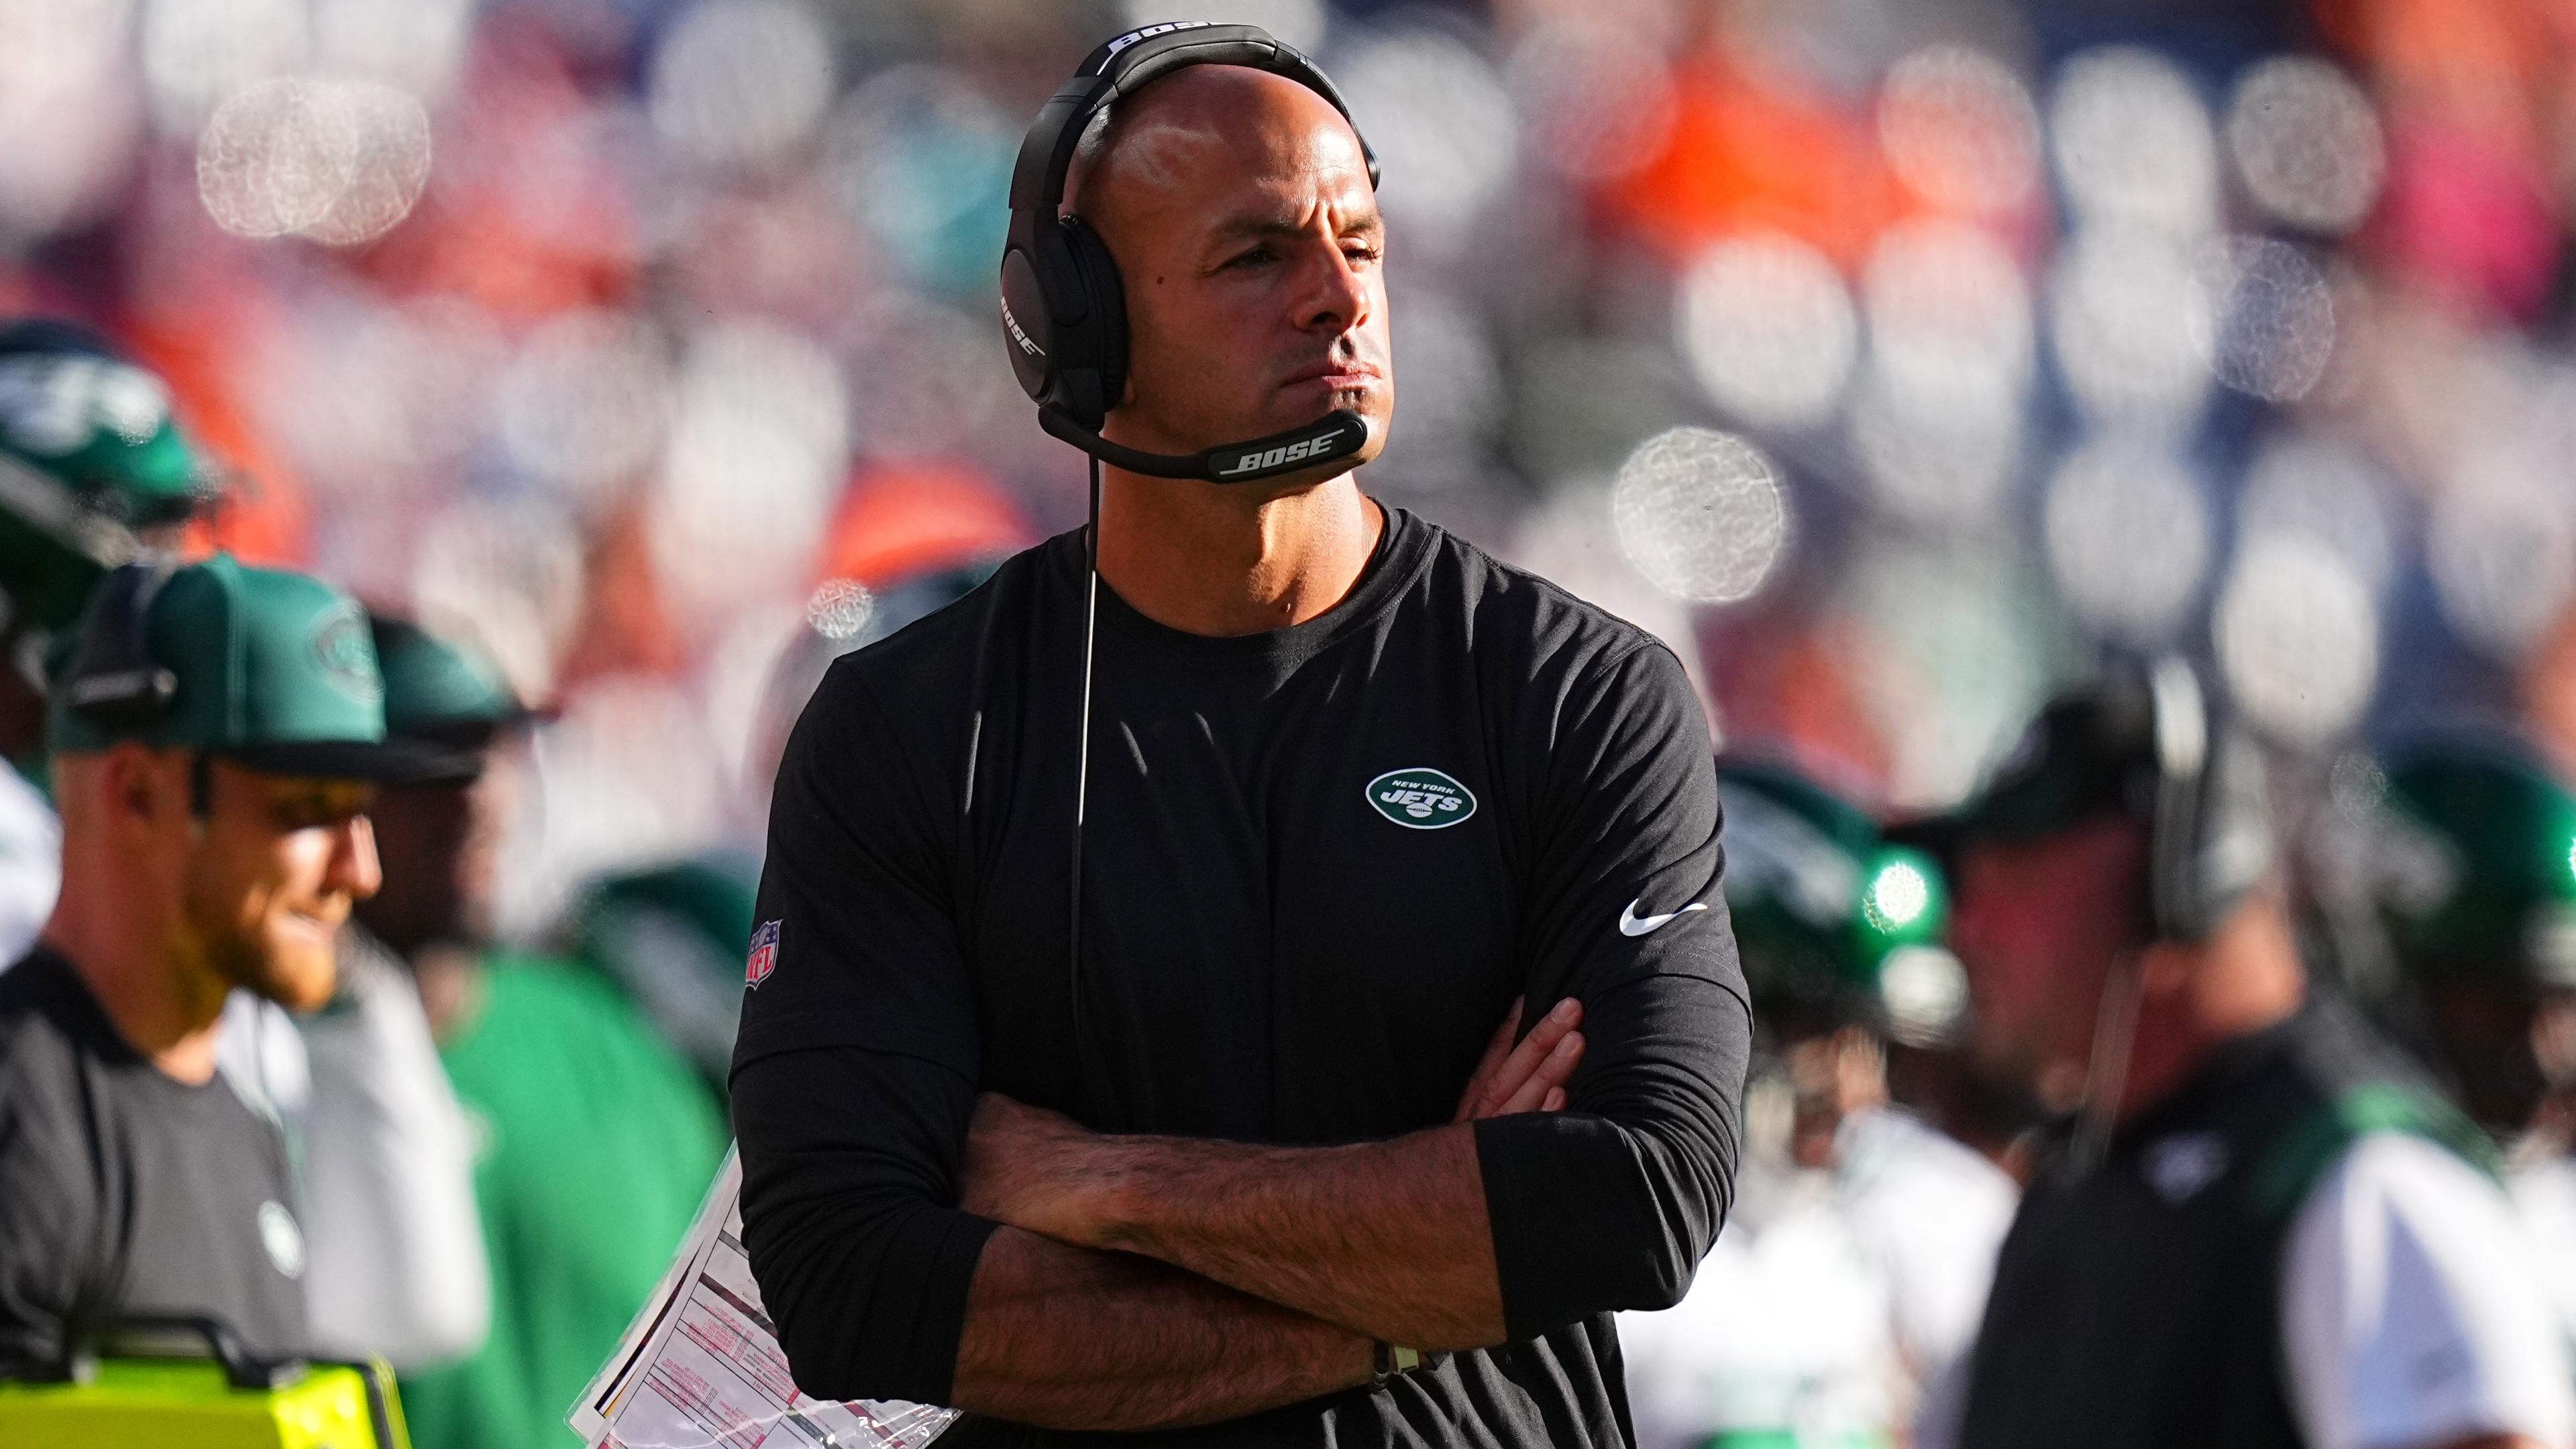 Sep 26, 2021; Denver, Colorado, USA; New York Jets head coach Robert Saleh during the game against the Denver Broncos at Empower Field at Mile High. Mandatory Credit: Ron Chenoy-USA TODAY Sports / © Ron Chenoy-USA TODAY Sports